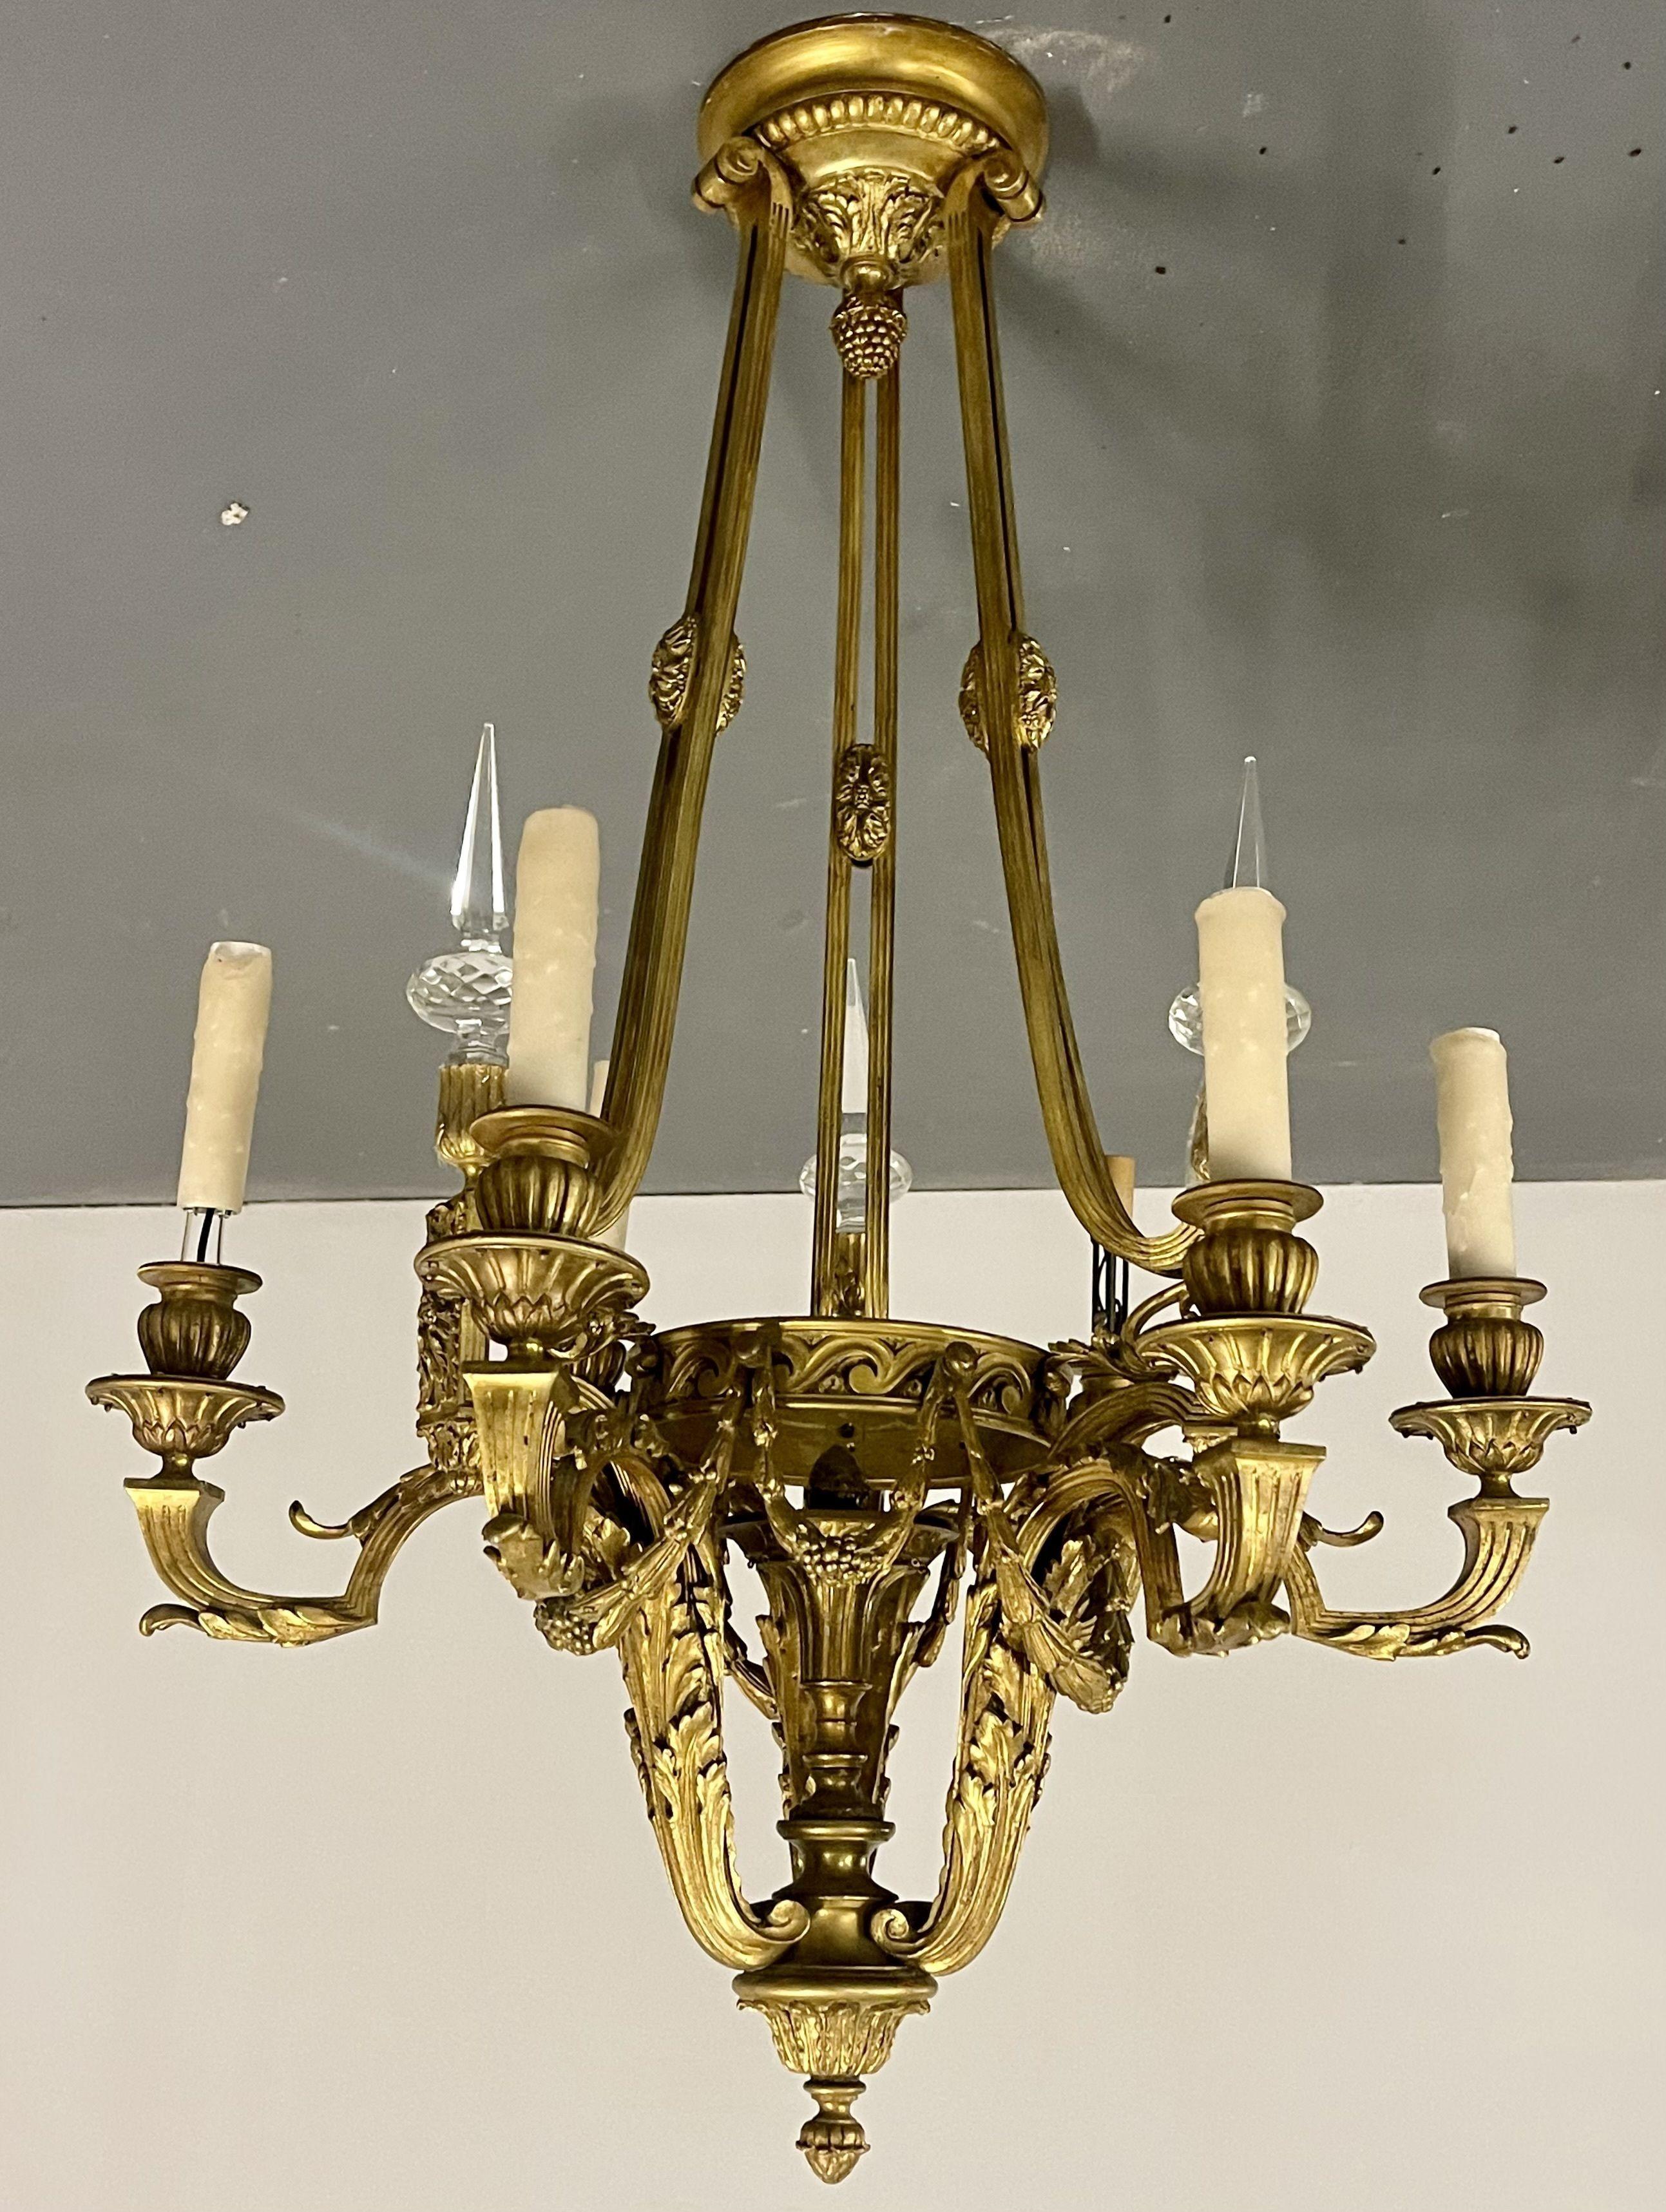 Louis XVI 19th century dore bronze chandelier, This solid bronze six light, nine arm, chandelier was recently rewired about ten years ago. Having a very fine think bronze masculine finish this seemingly flawless chandelier is certain to make a